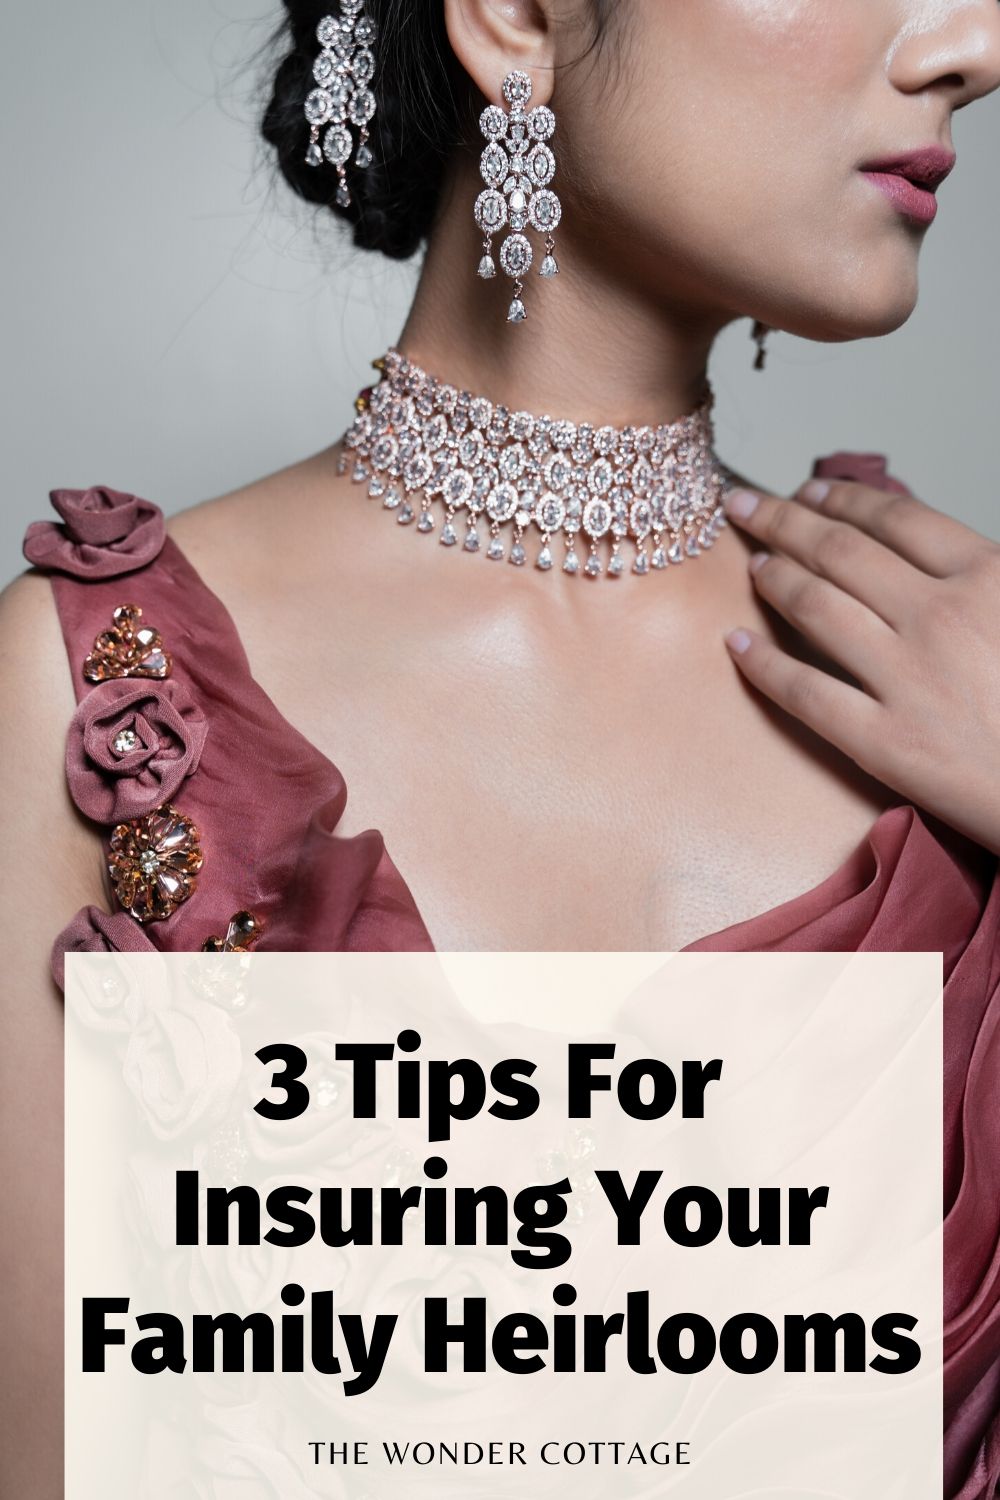 3 tips for insuring your family heirlooms